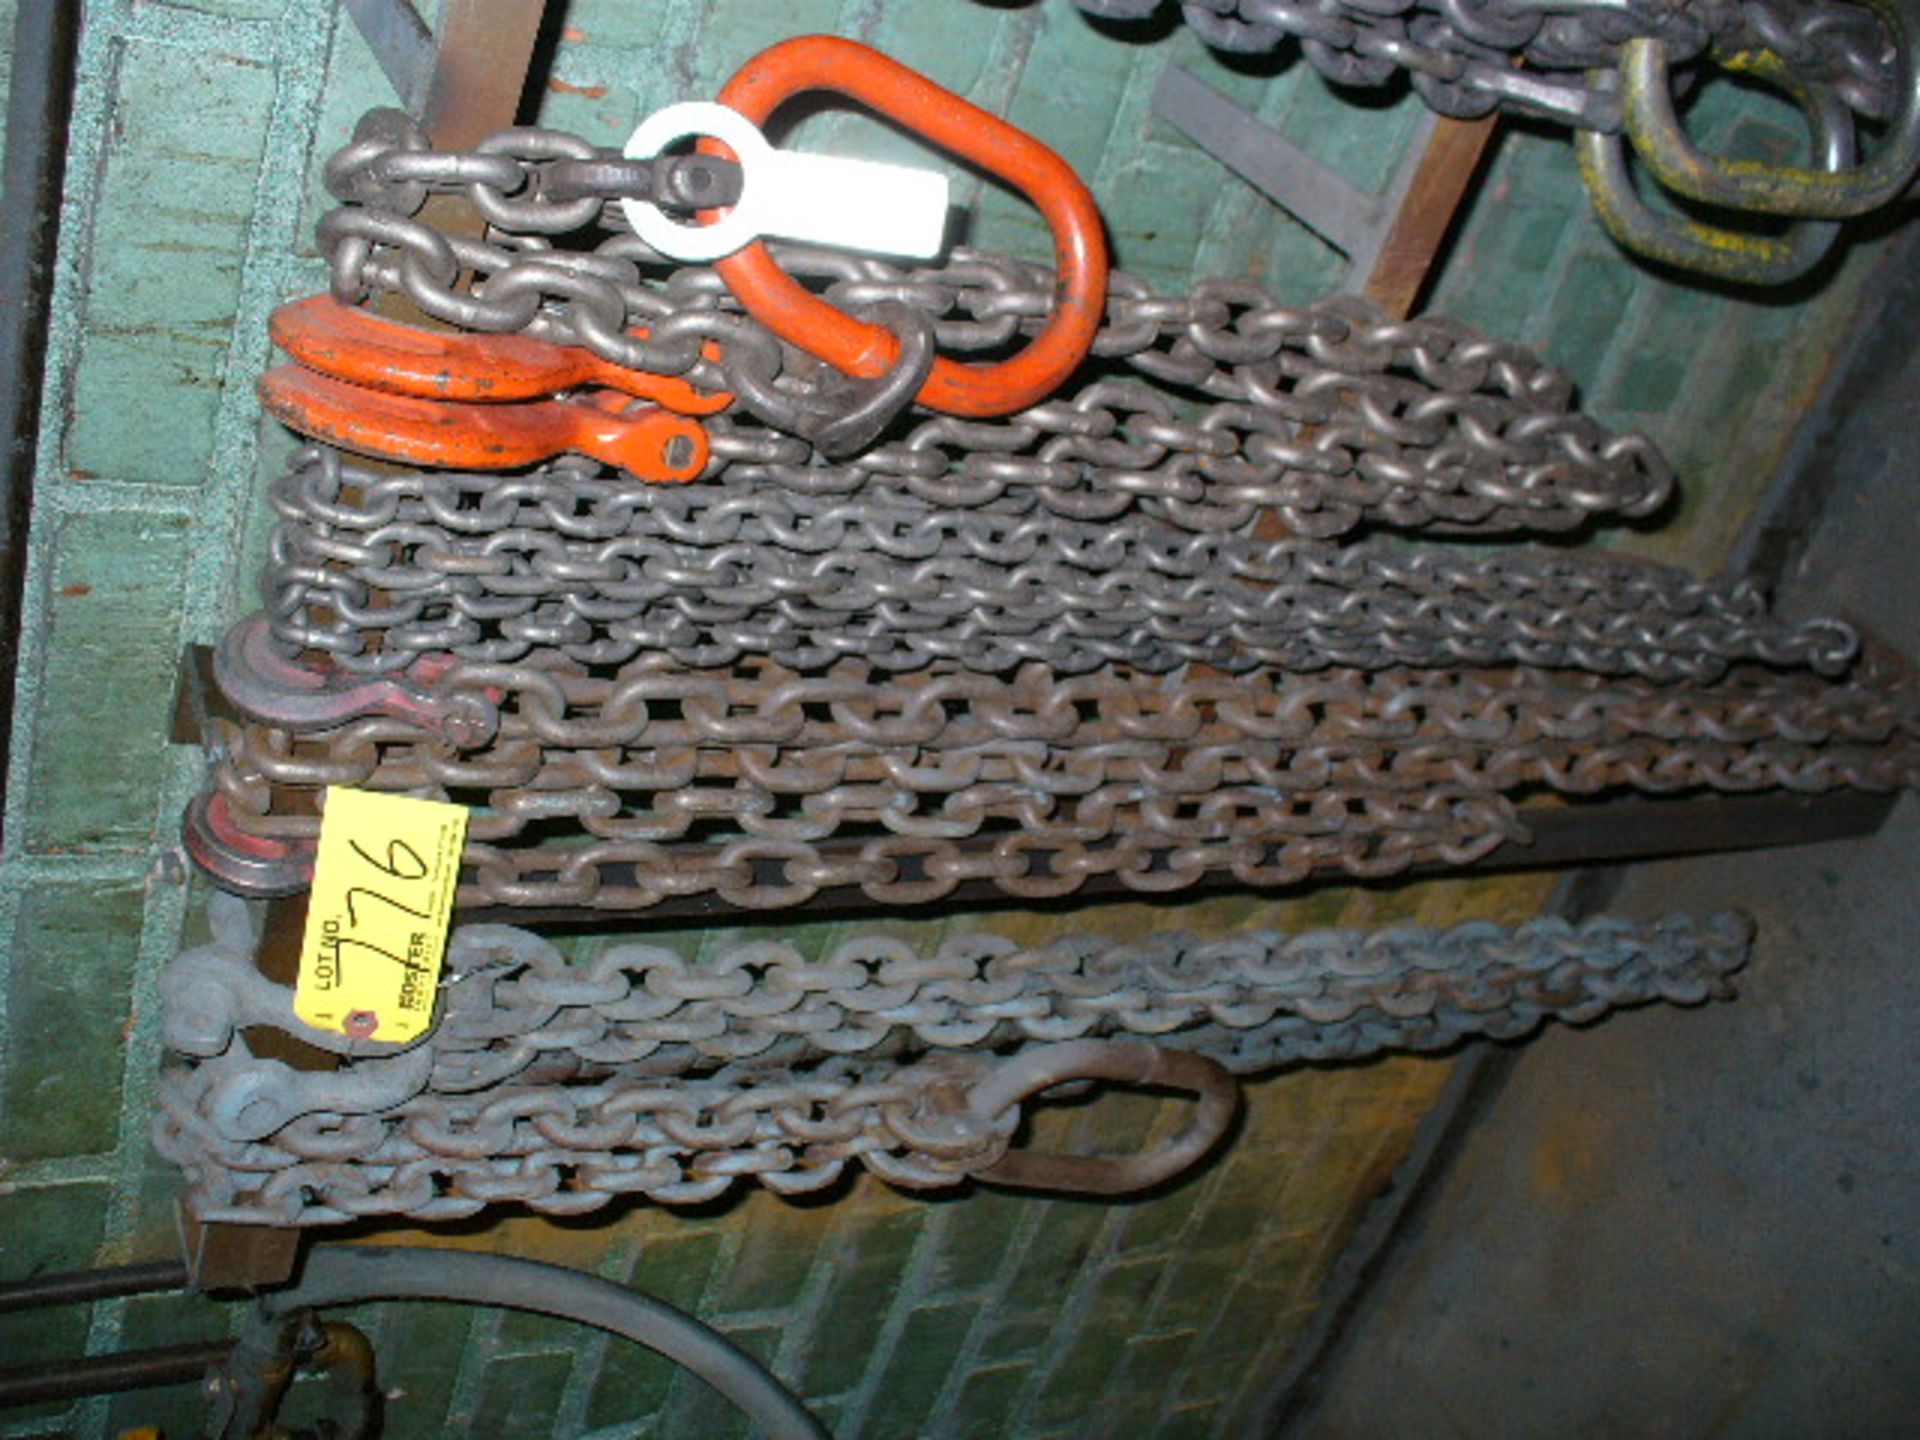 LOT OF ASSORTED SIZE LIFTING CHAINS, MOST CHAINS ARE CERTIFIED